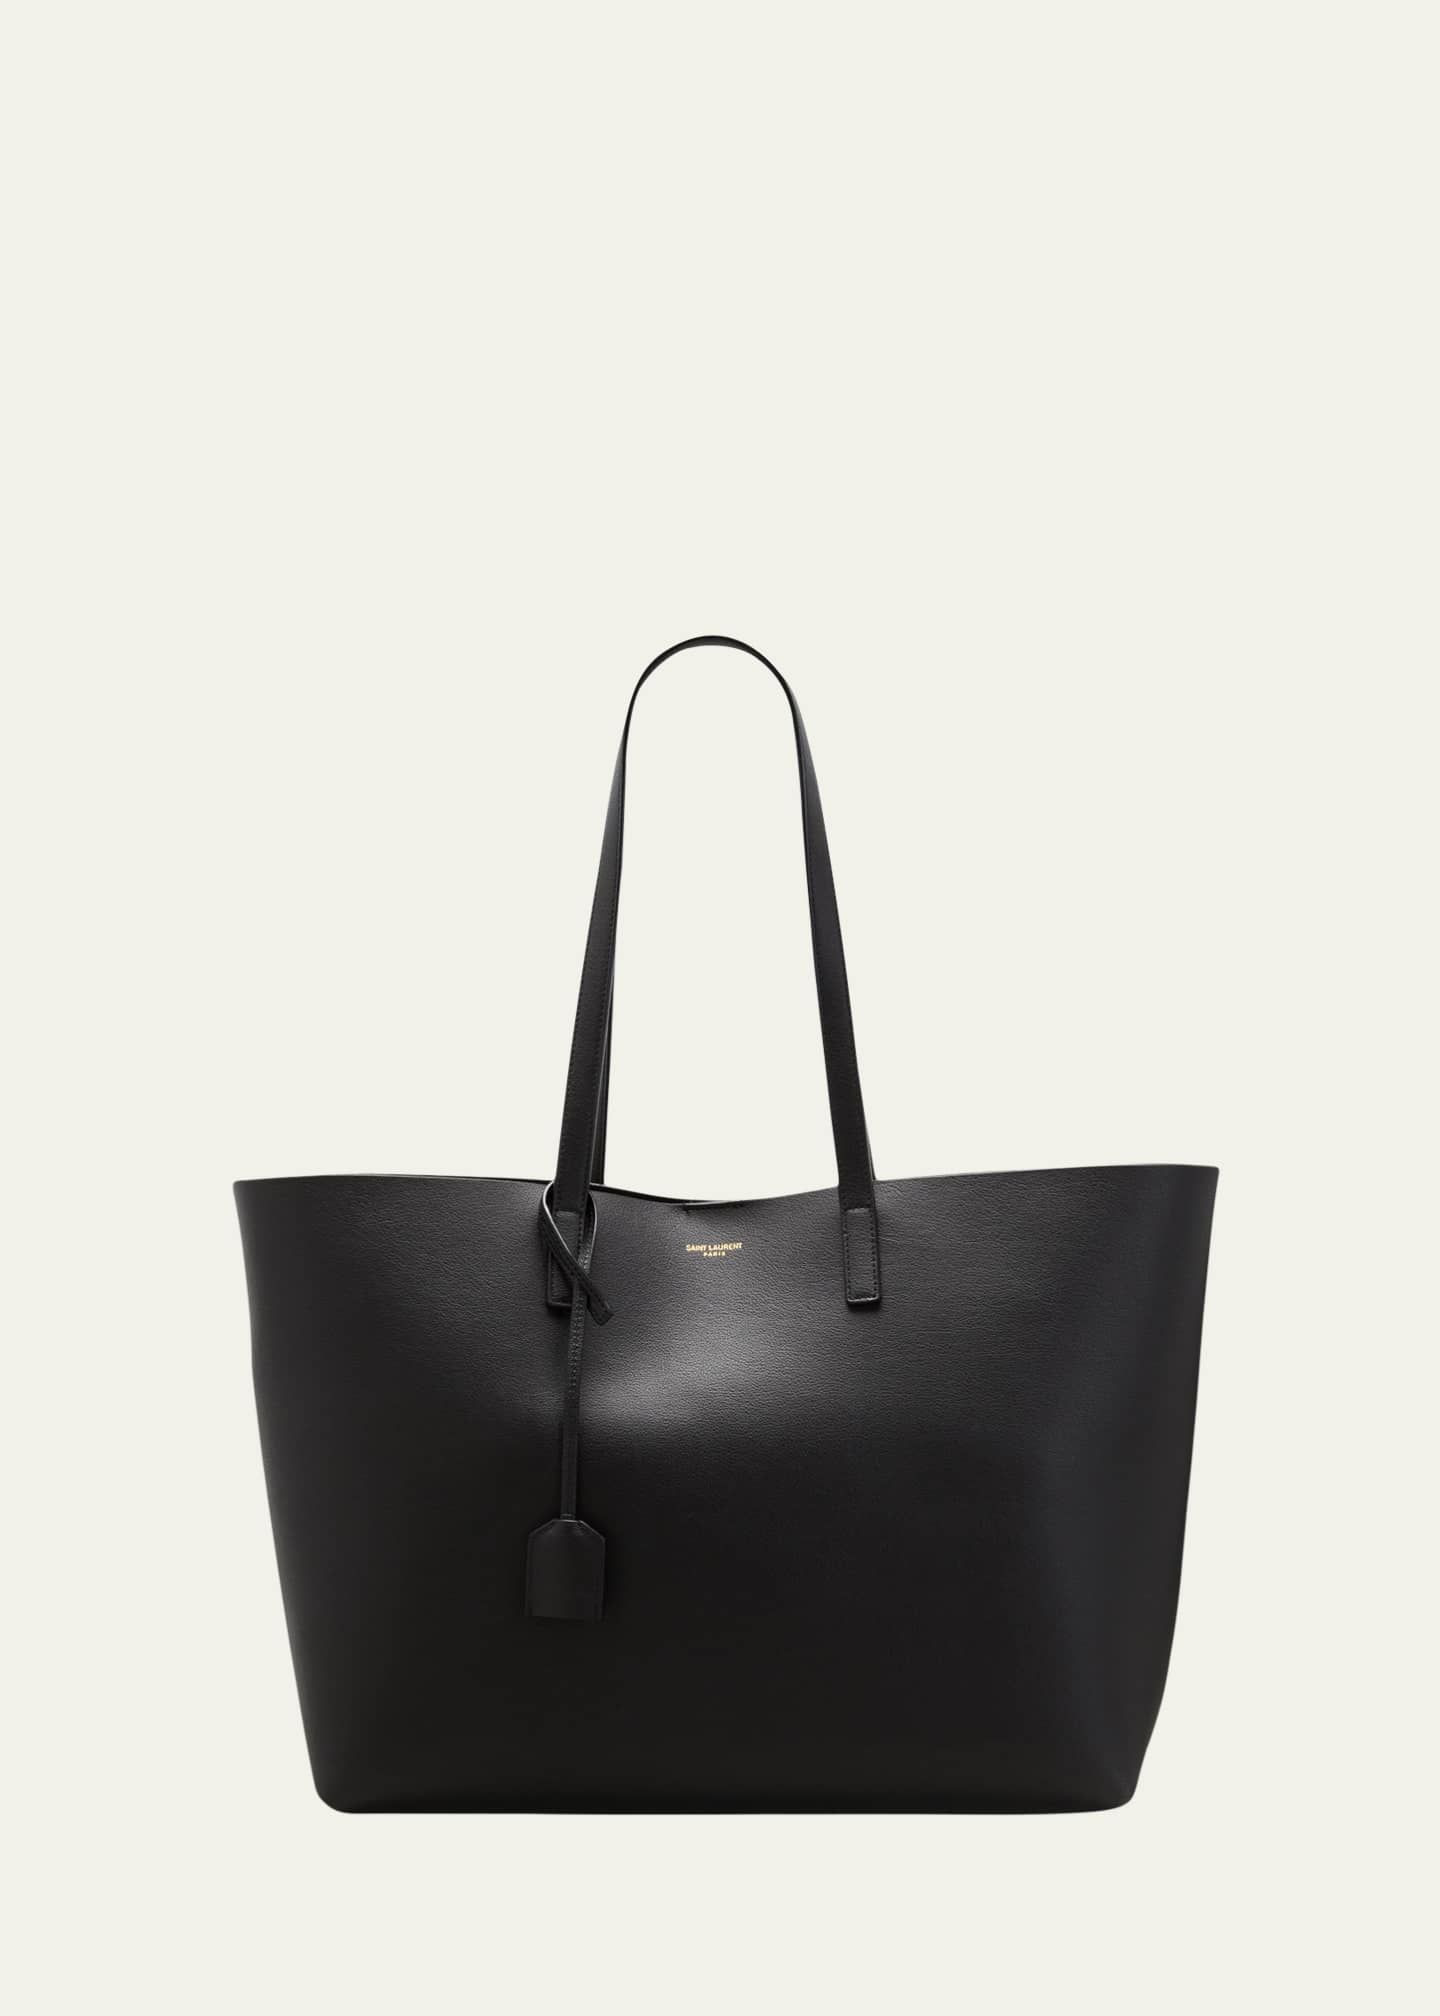 Beatrice Brown - Leather Tote / Work Bag - Republic of Florence